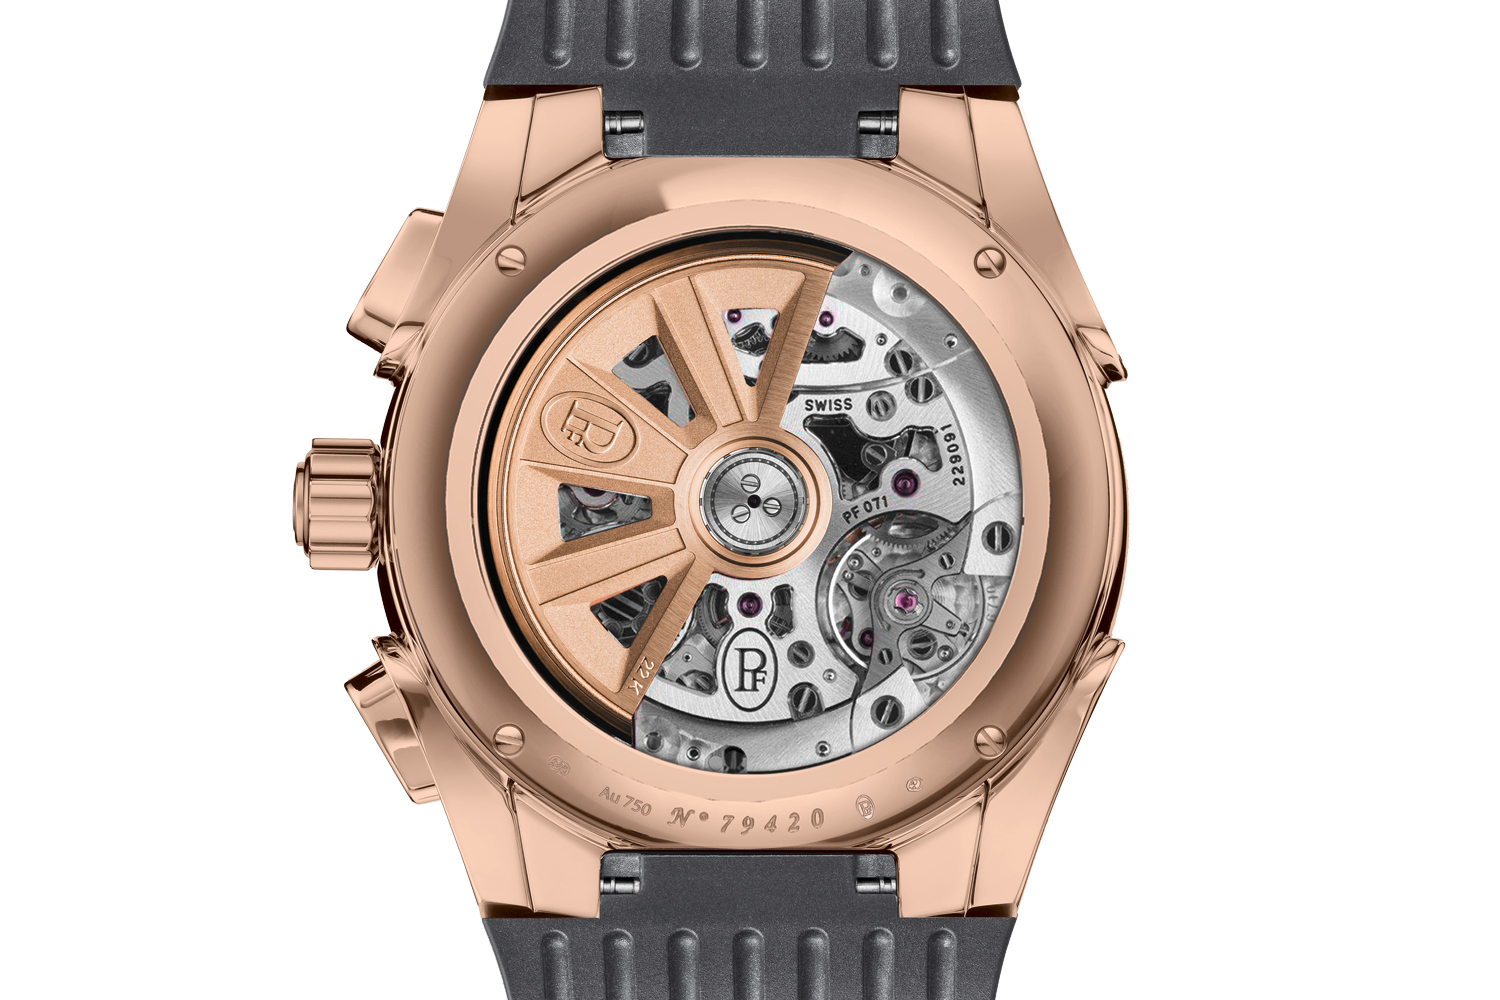 Rose gold version with large date features a 5Hz chronometer movement